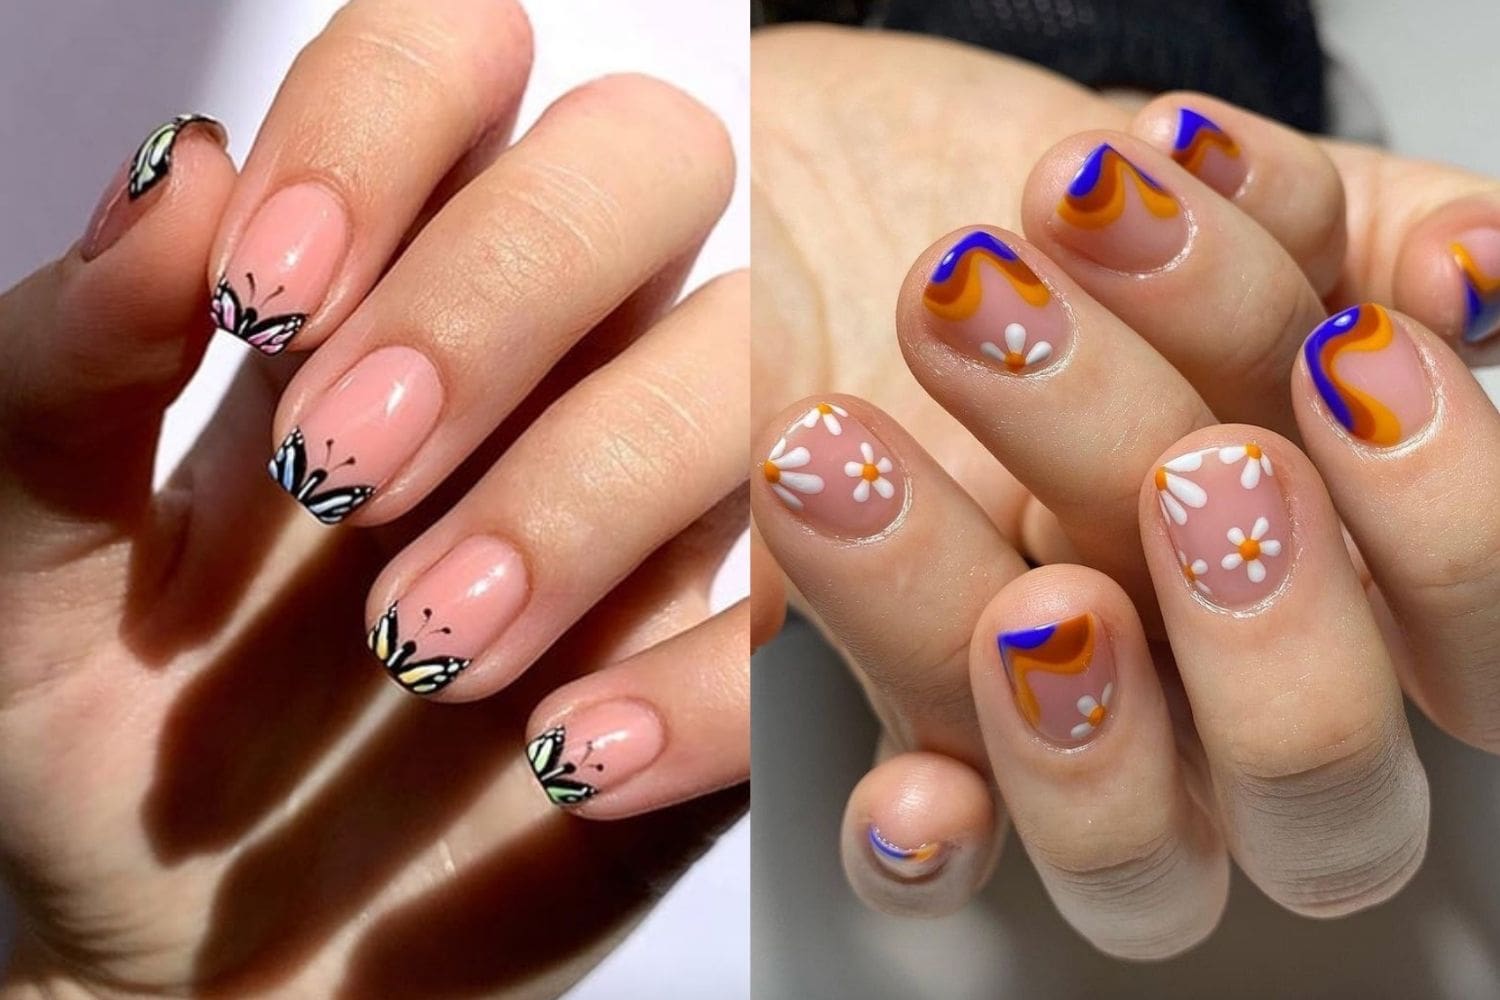 25 Short Nail Designs That Look Great Year Round - Let's Eat Cake